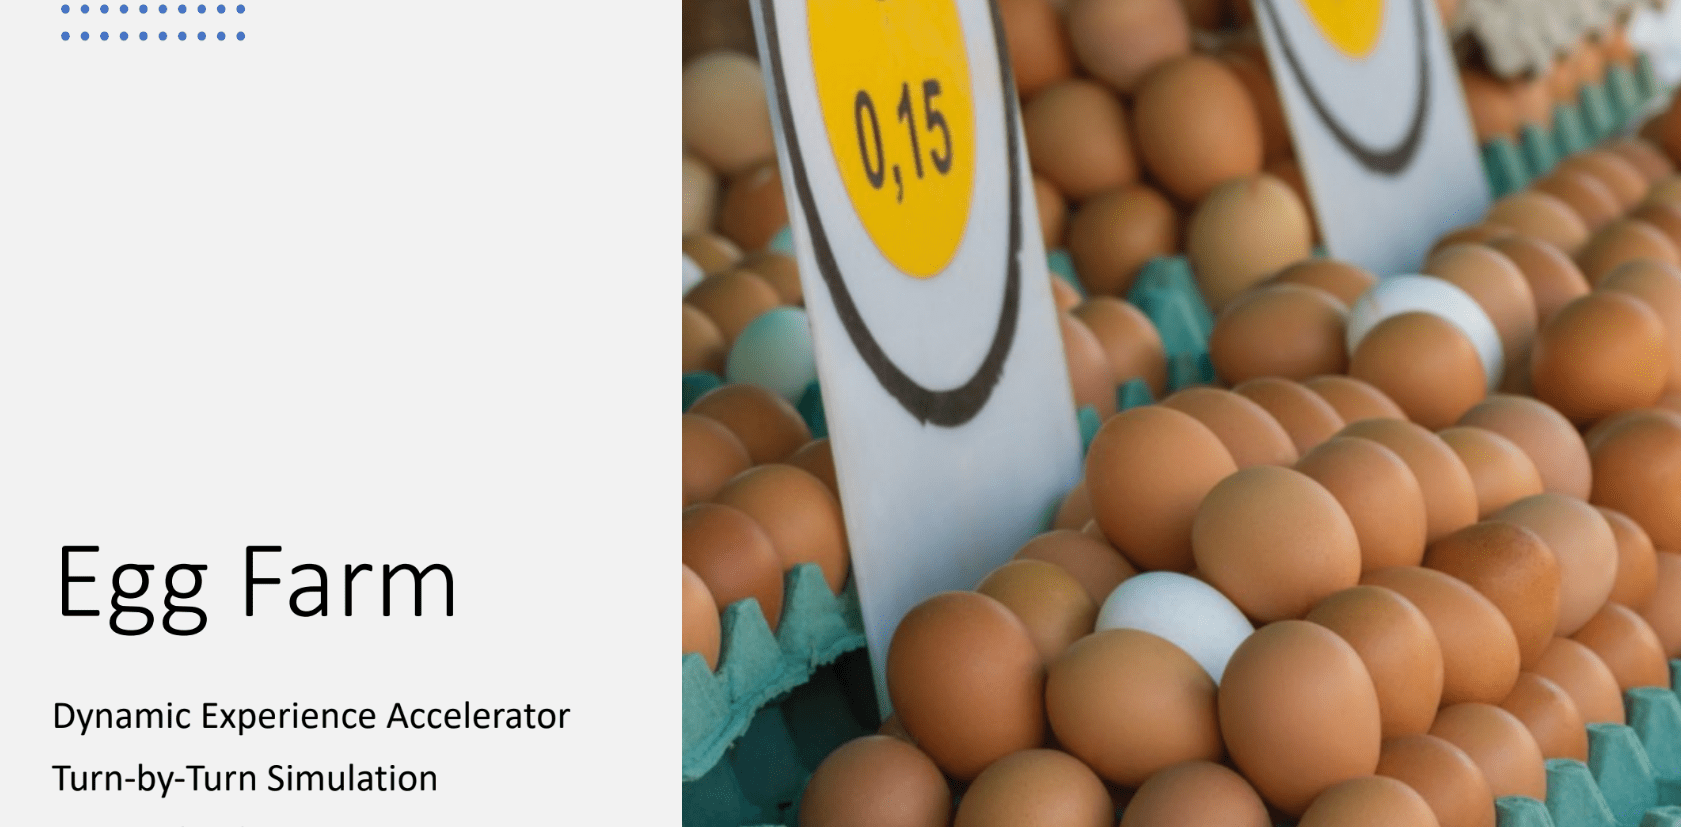 chicken eggs in a crate with a label and on the left a text that reads Egg farm dynamics experience accelerator